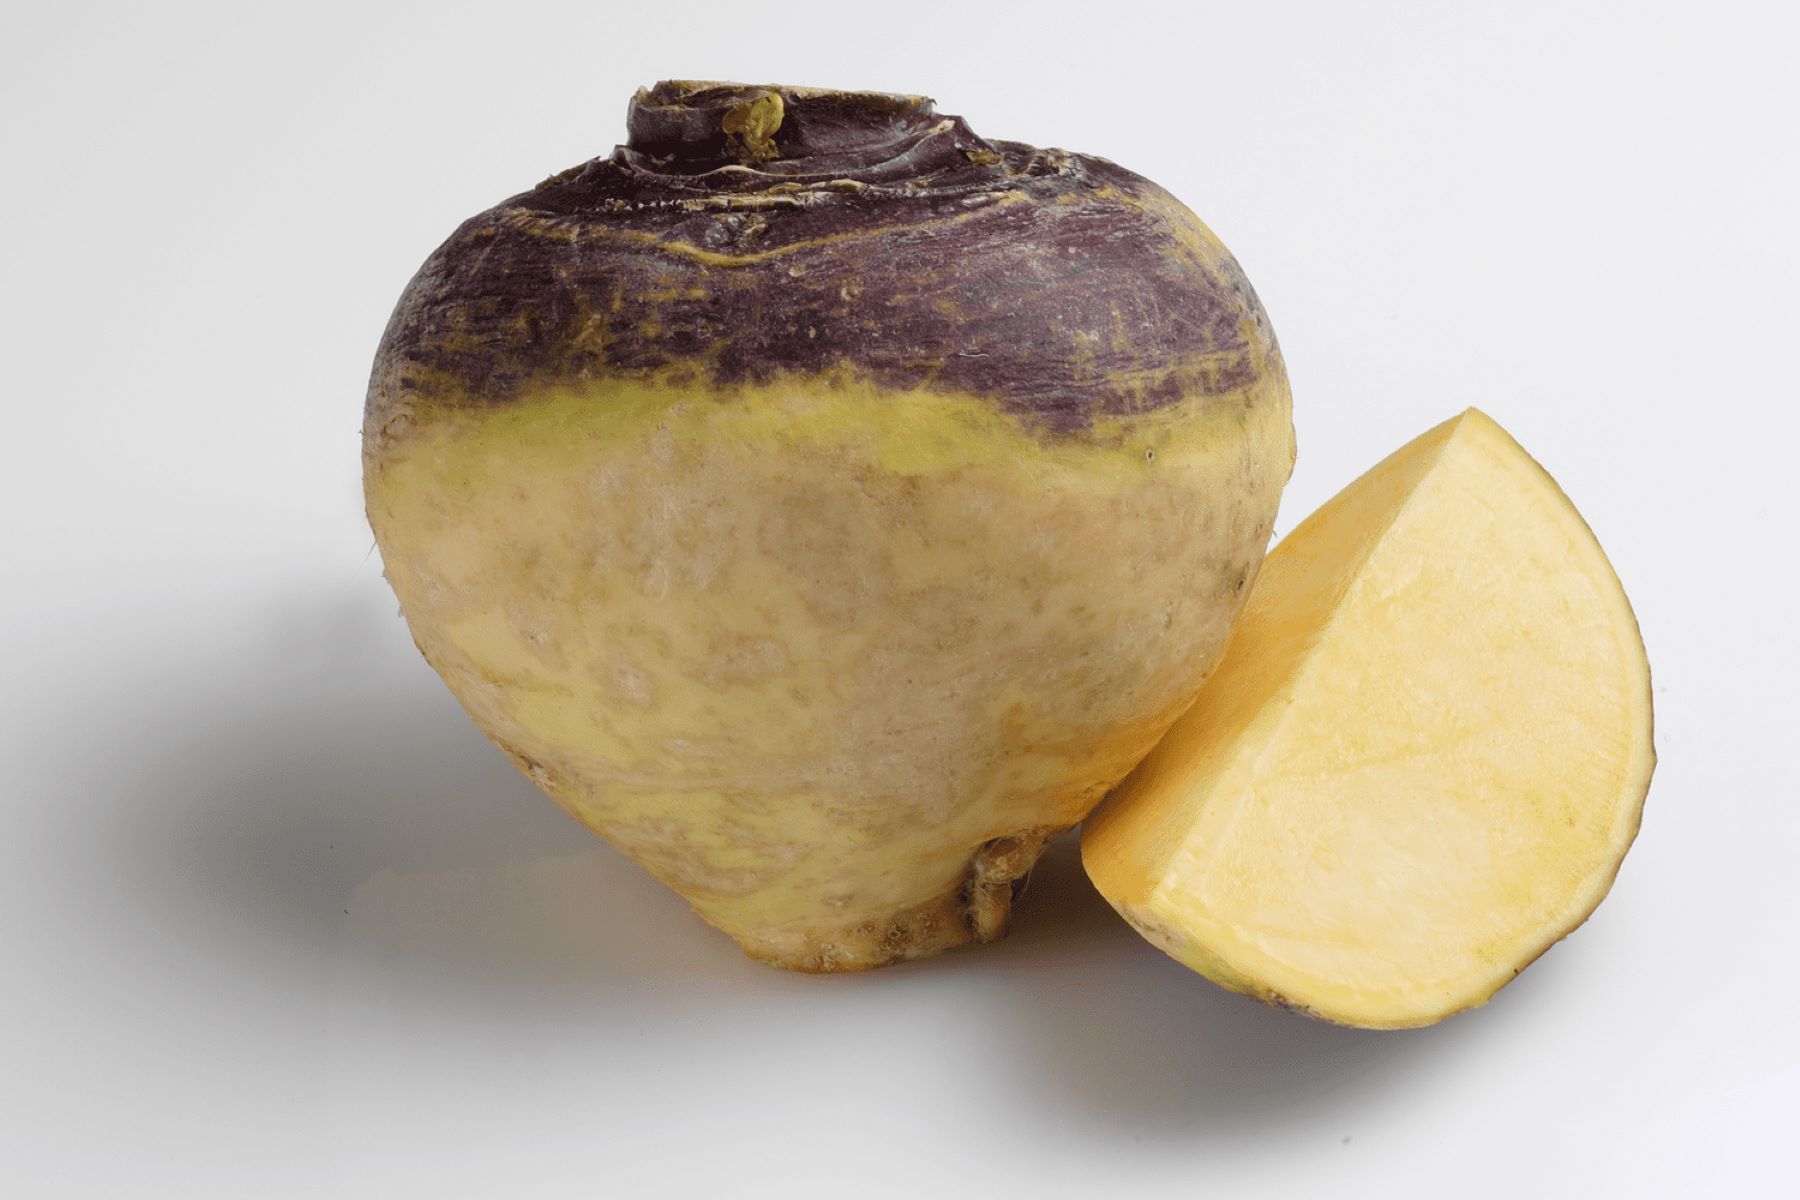 How To Store Rutabaga After Cutting